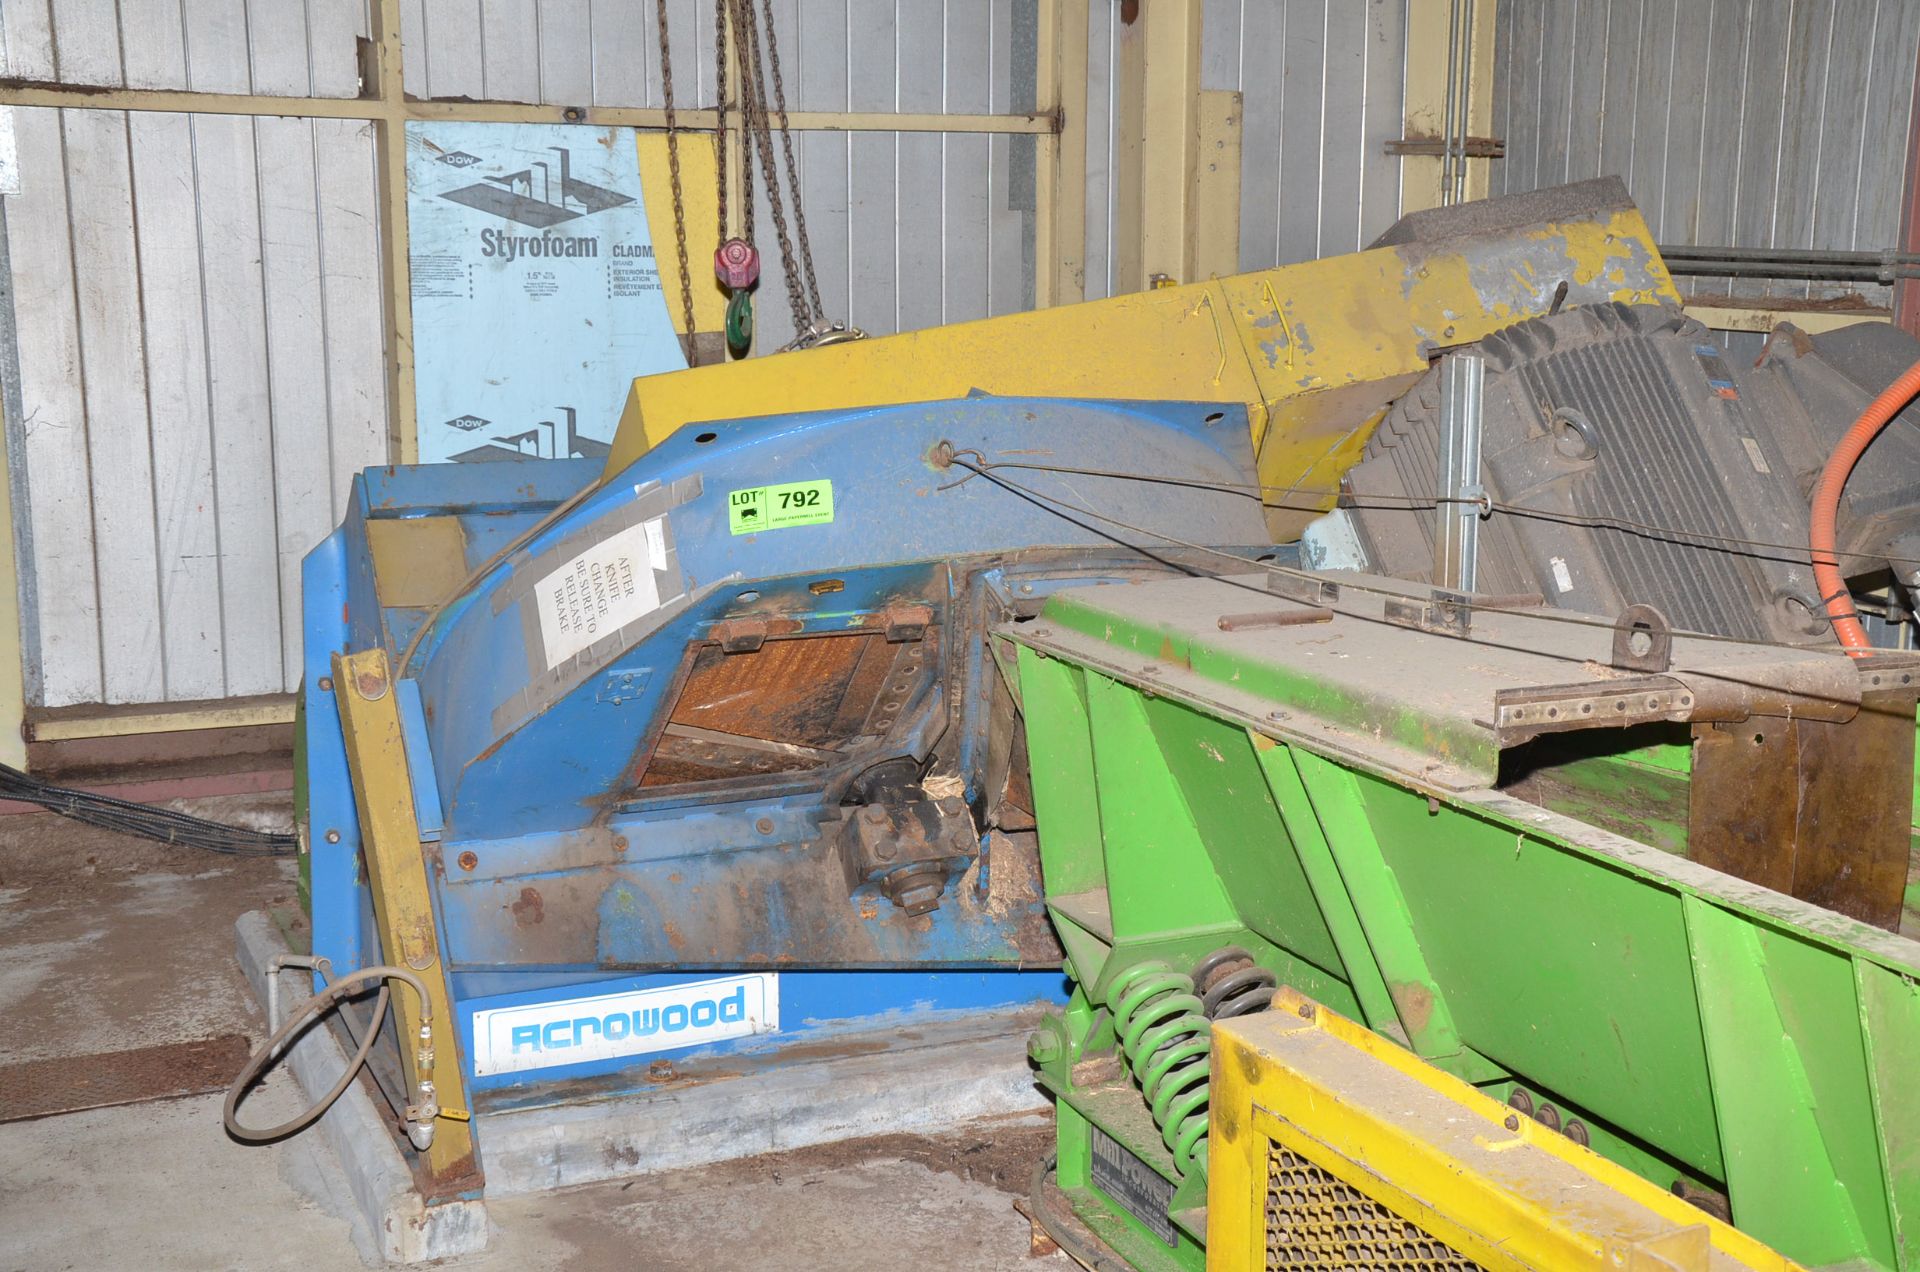 ACROWOOD (REBUILT DINGWELLS 2003) MODEL 6120 WOOD CHIPPER WITH 300 HP ELECTRIC DRIVE MOTOR, S/N